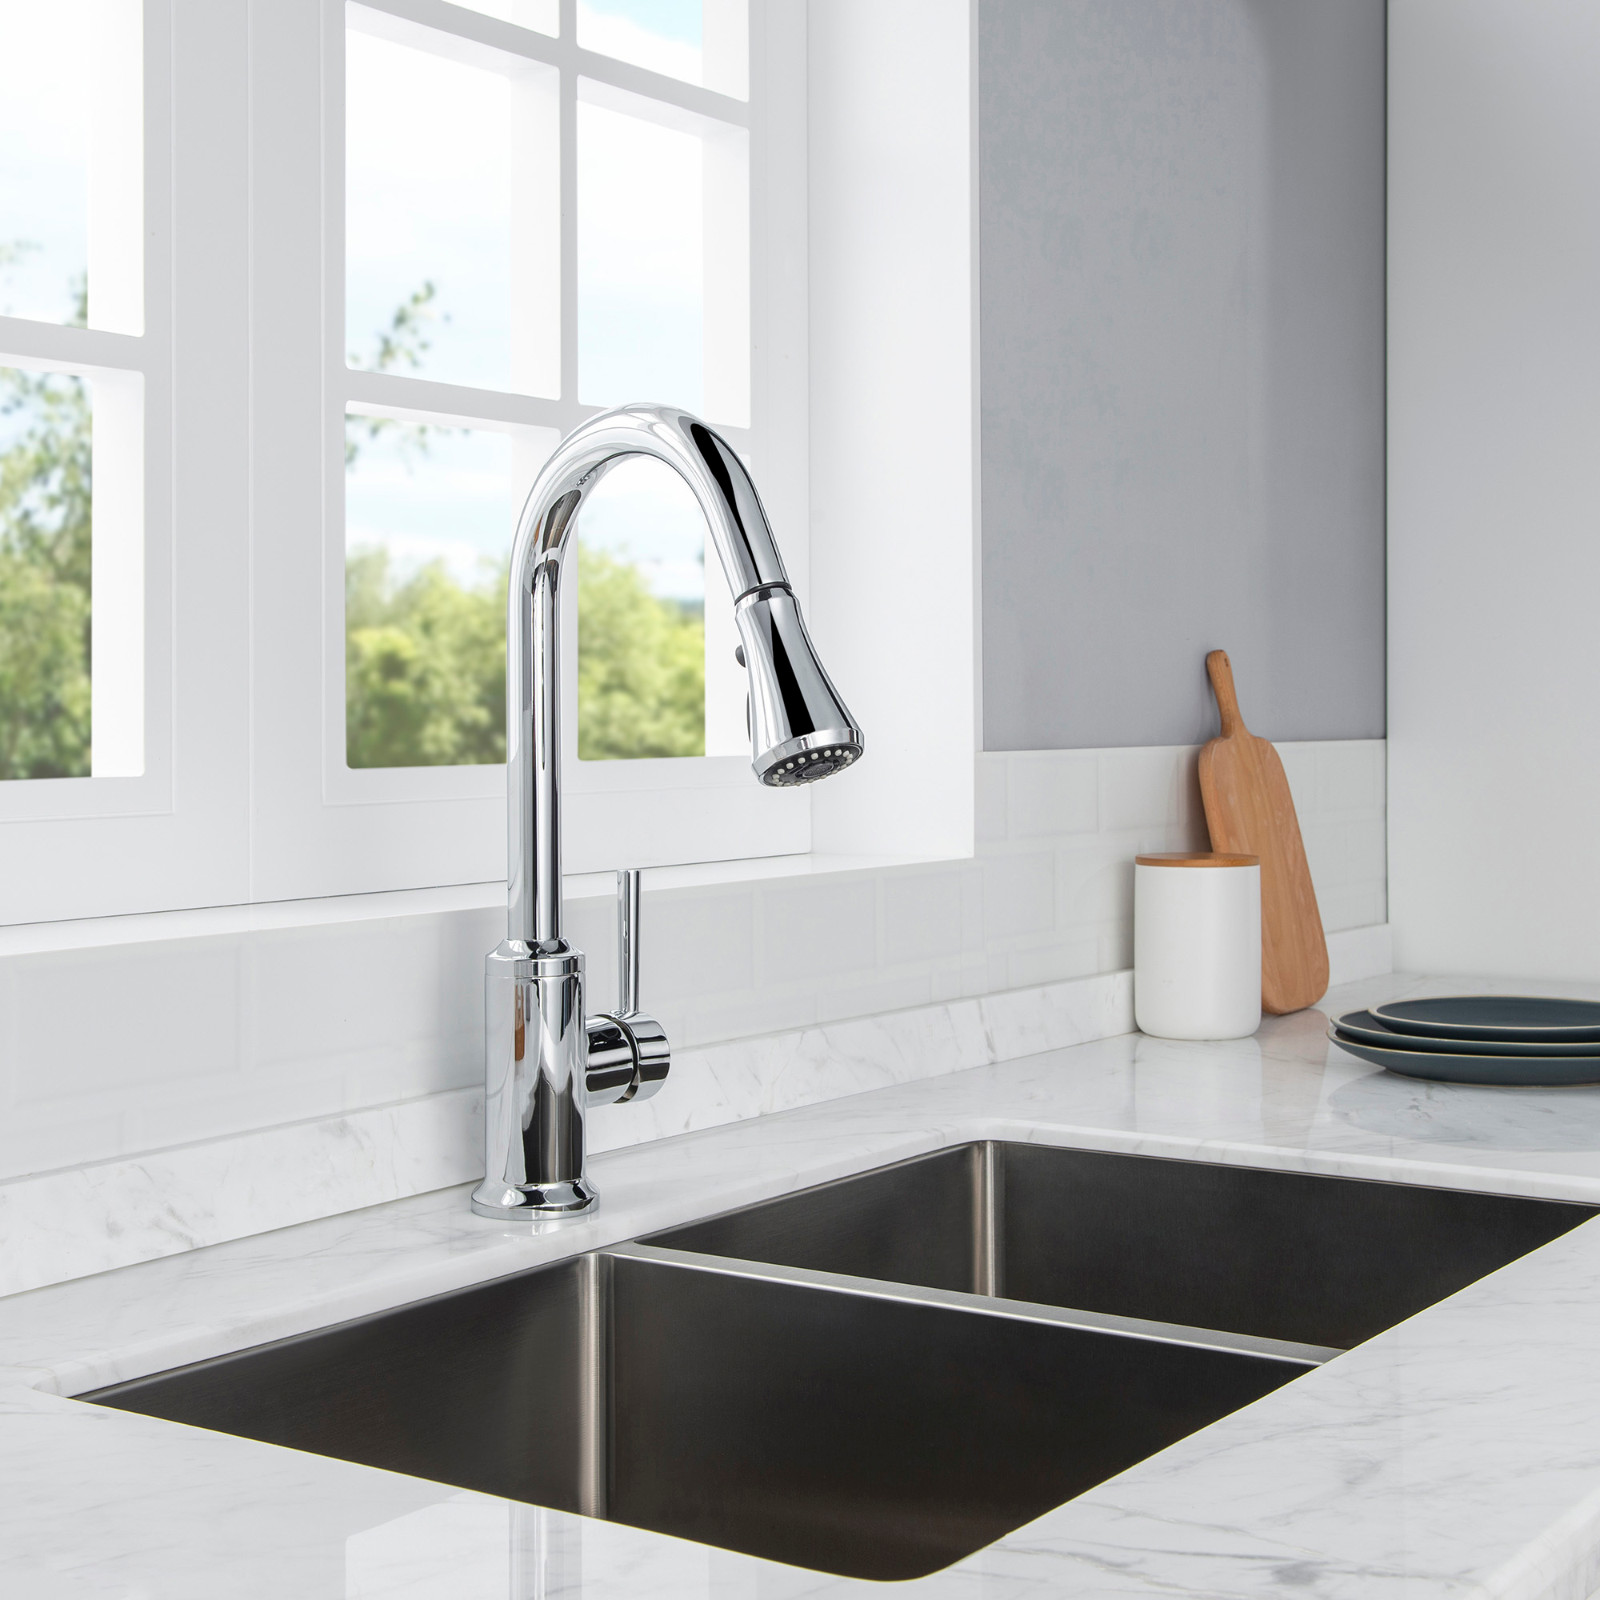  WOODBRIDGE WK101201CH Stainless Steel Single Handle Pull Down Kitchen Faucet in Chrome Finish._9018